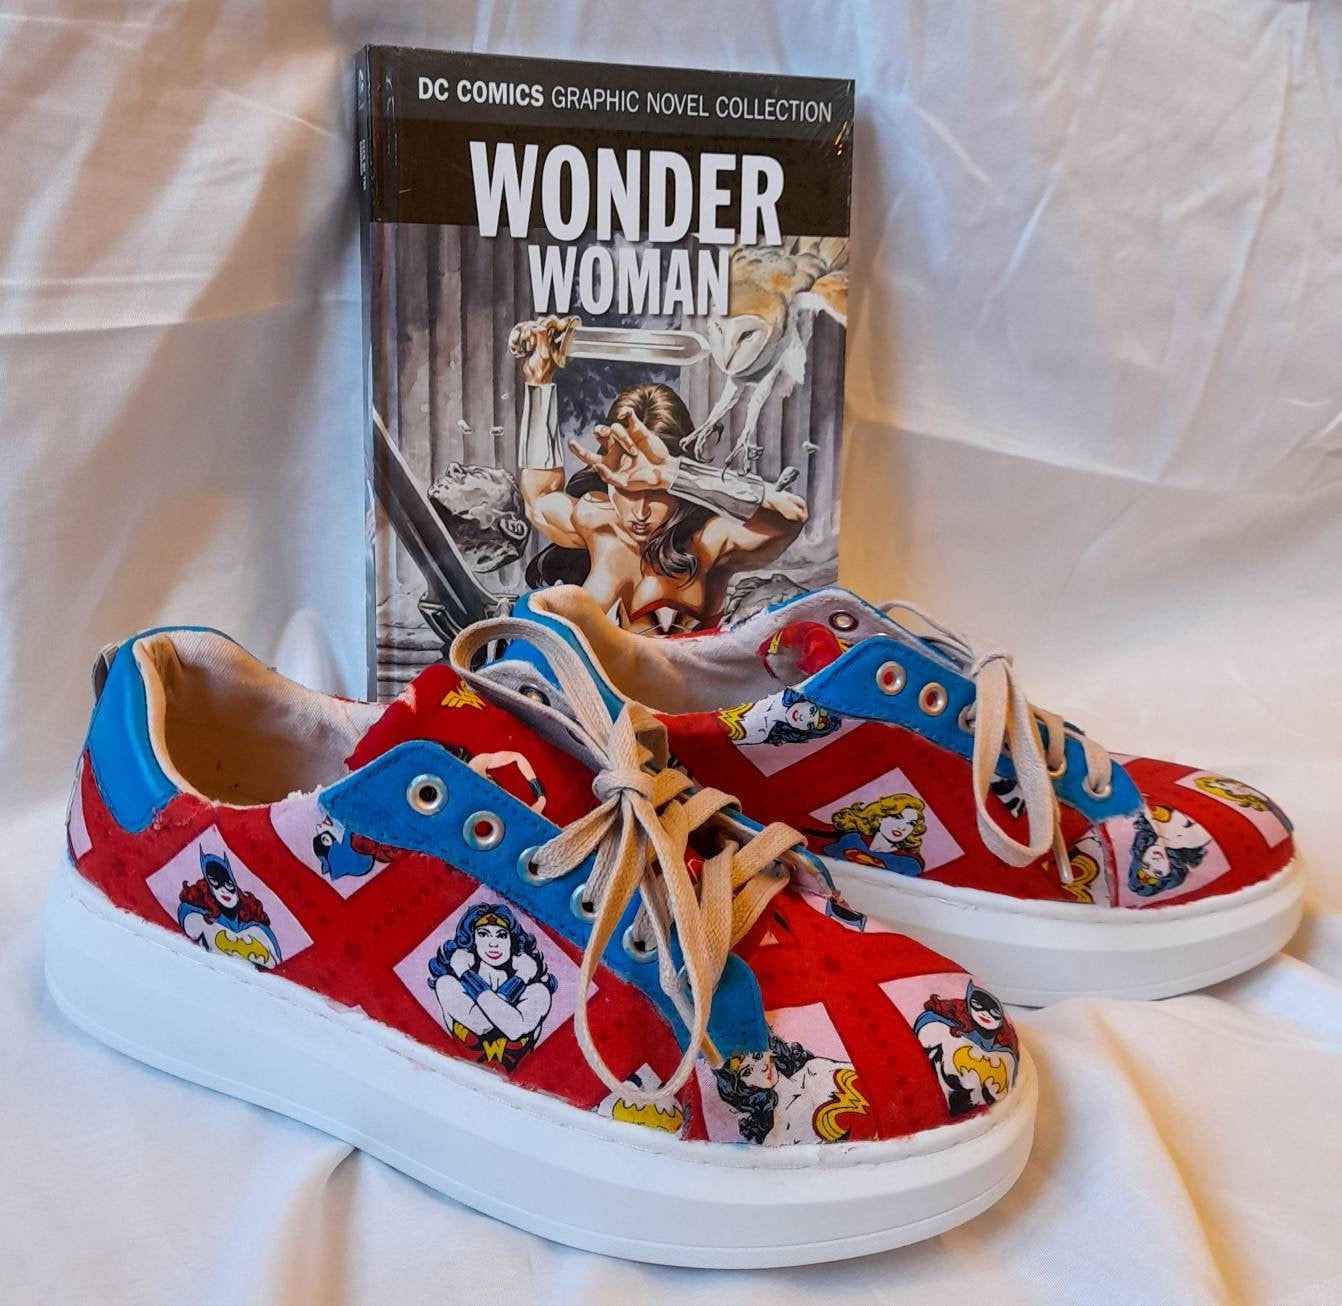 What do we think about these comic book sneakers ? I'm kind of